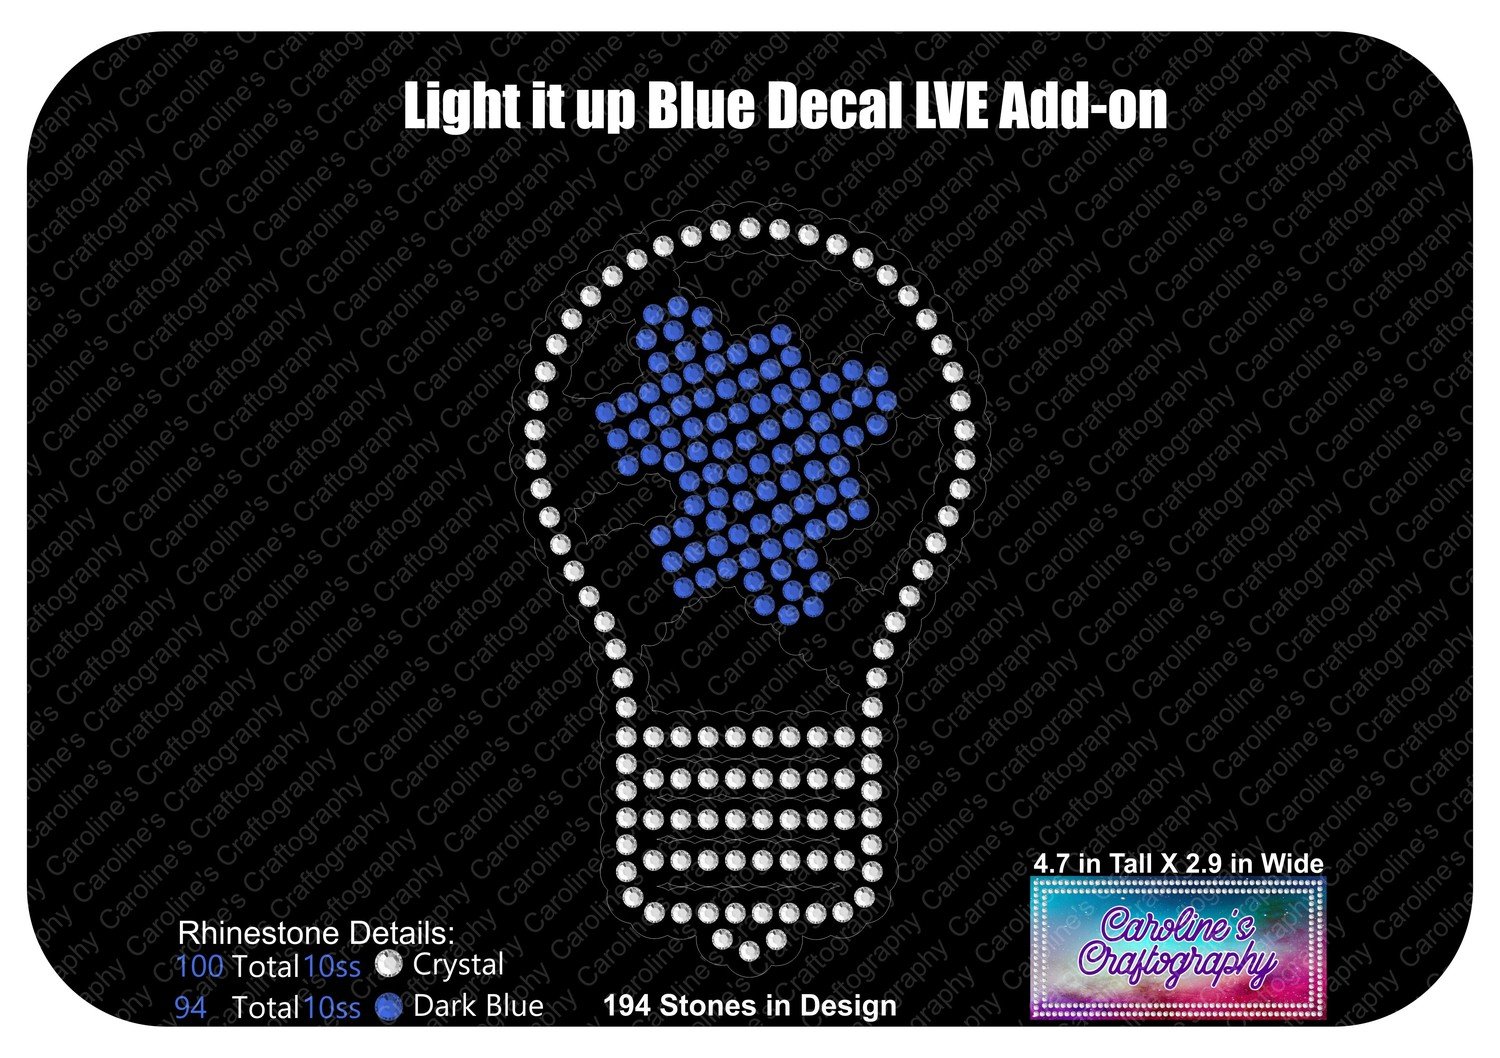 Autism Puzzle Piece Light Bulb Decal LVE Add-on